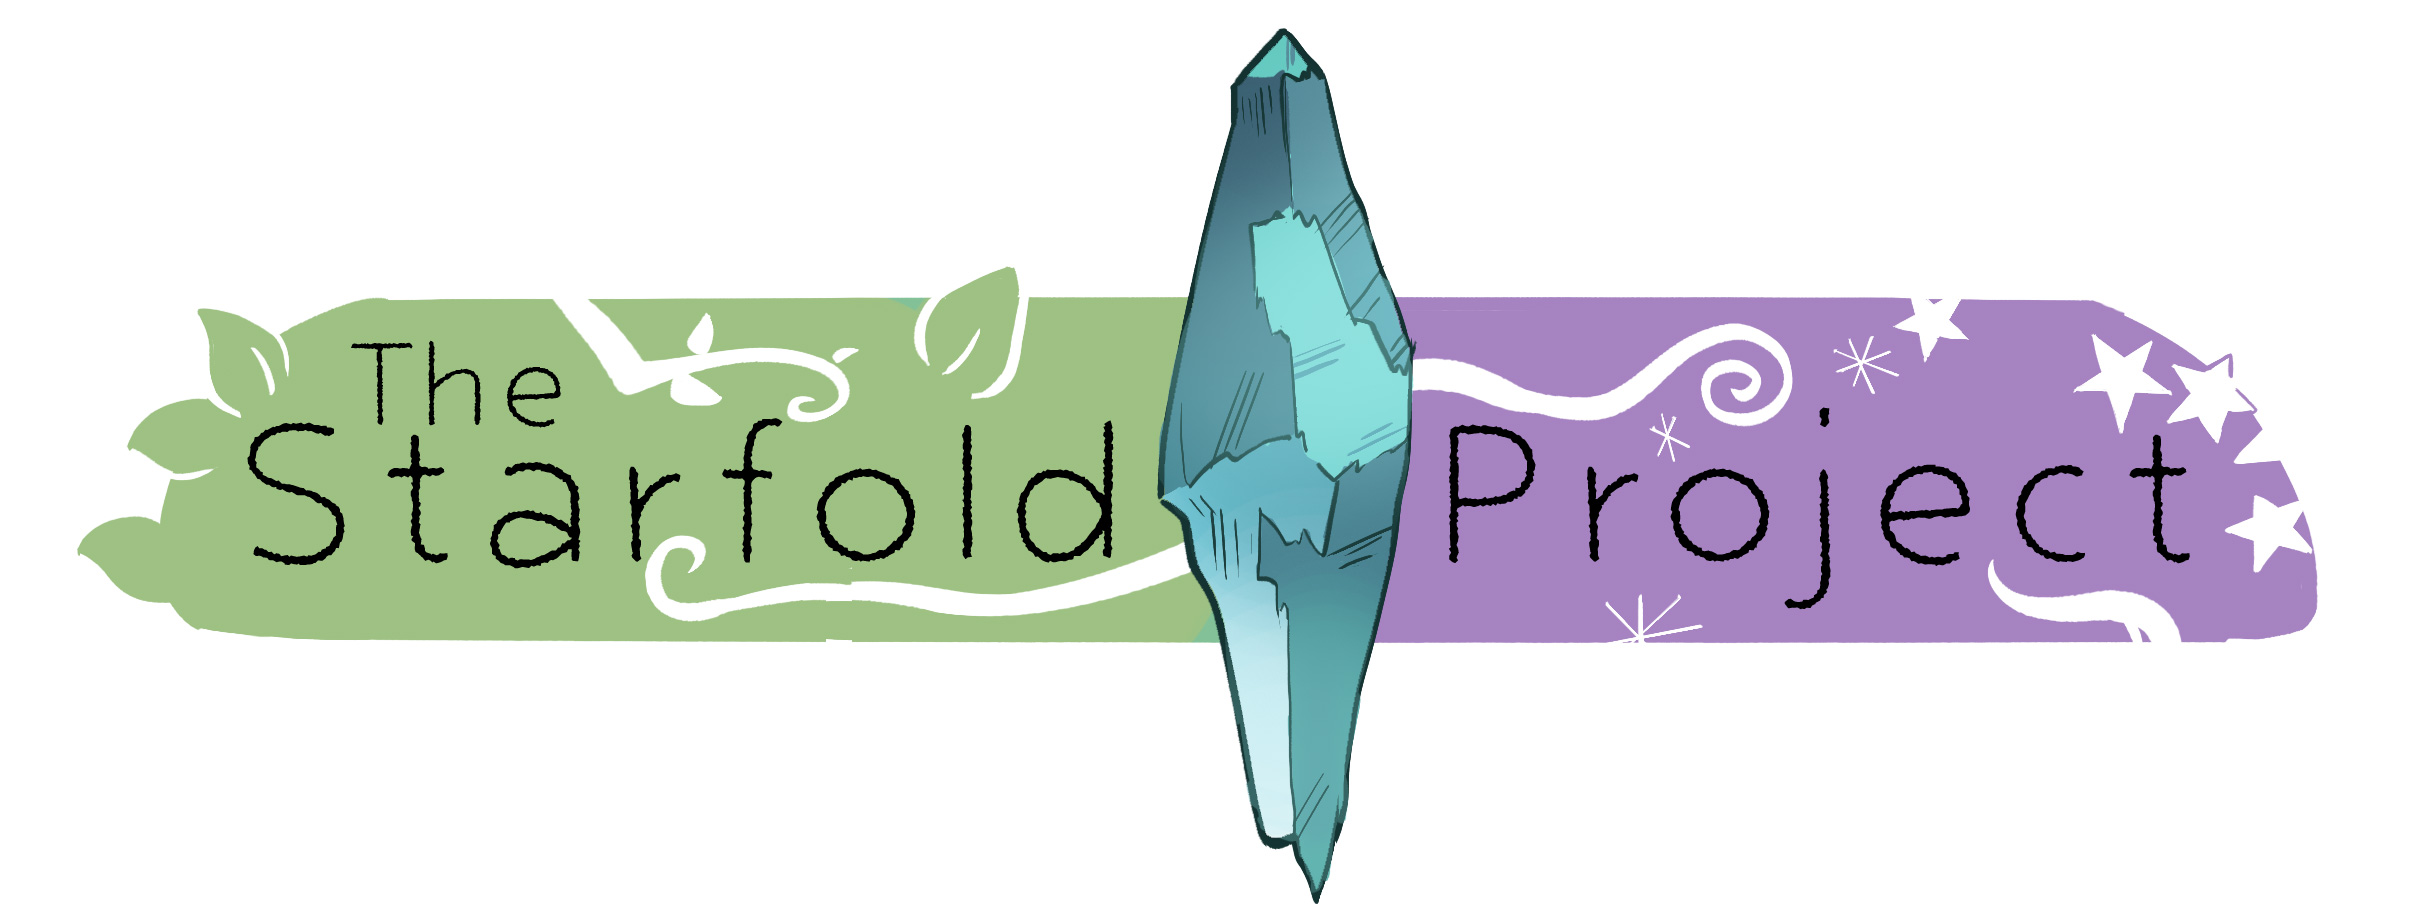 final logo for 'The Starfold Project'